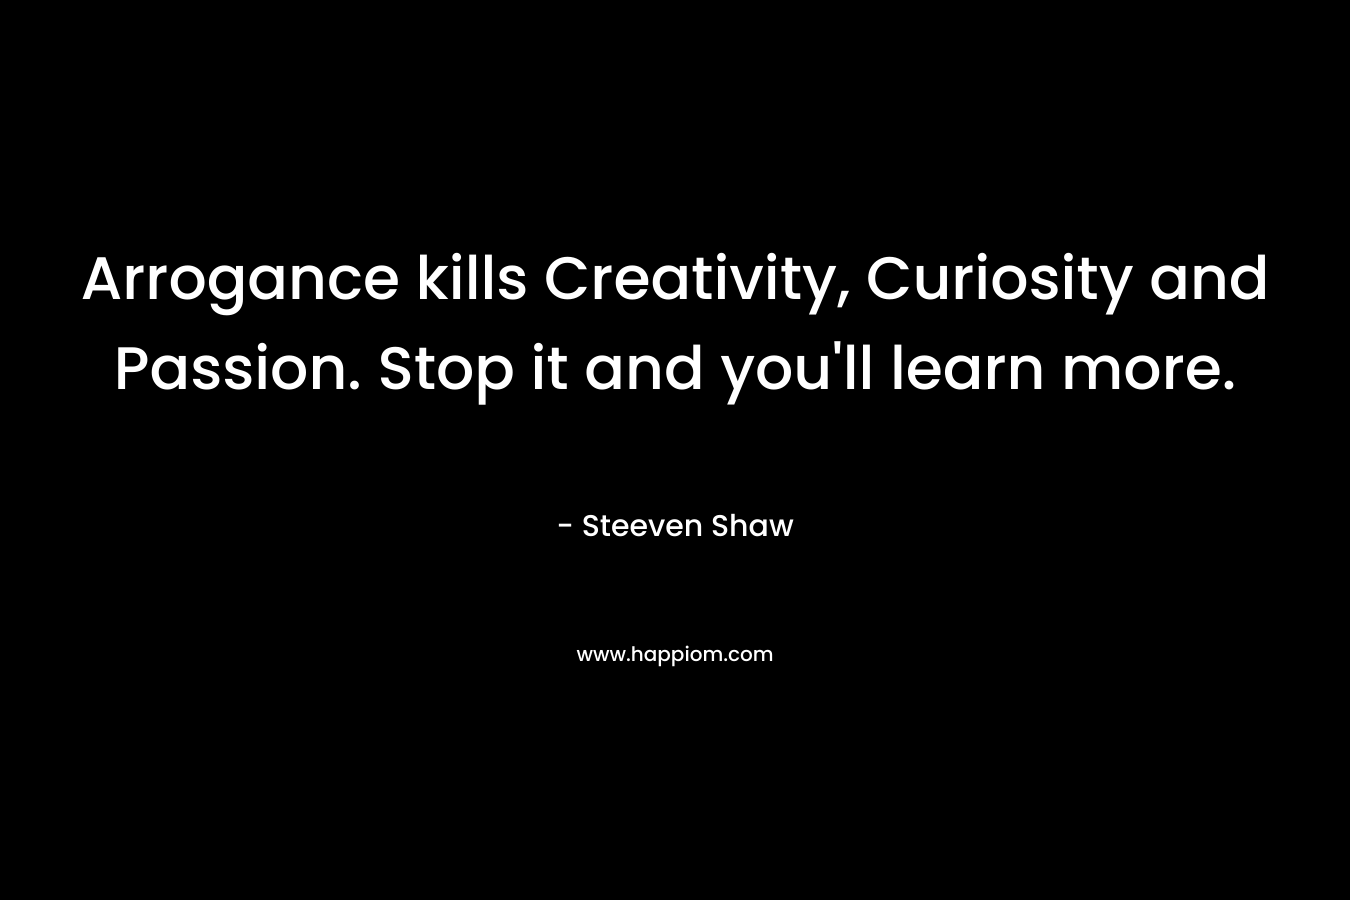 Arrogance kills Creativity, Curiosity and Passion. Stop it and you'll learn more.